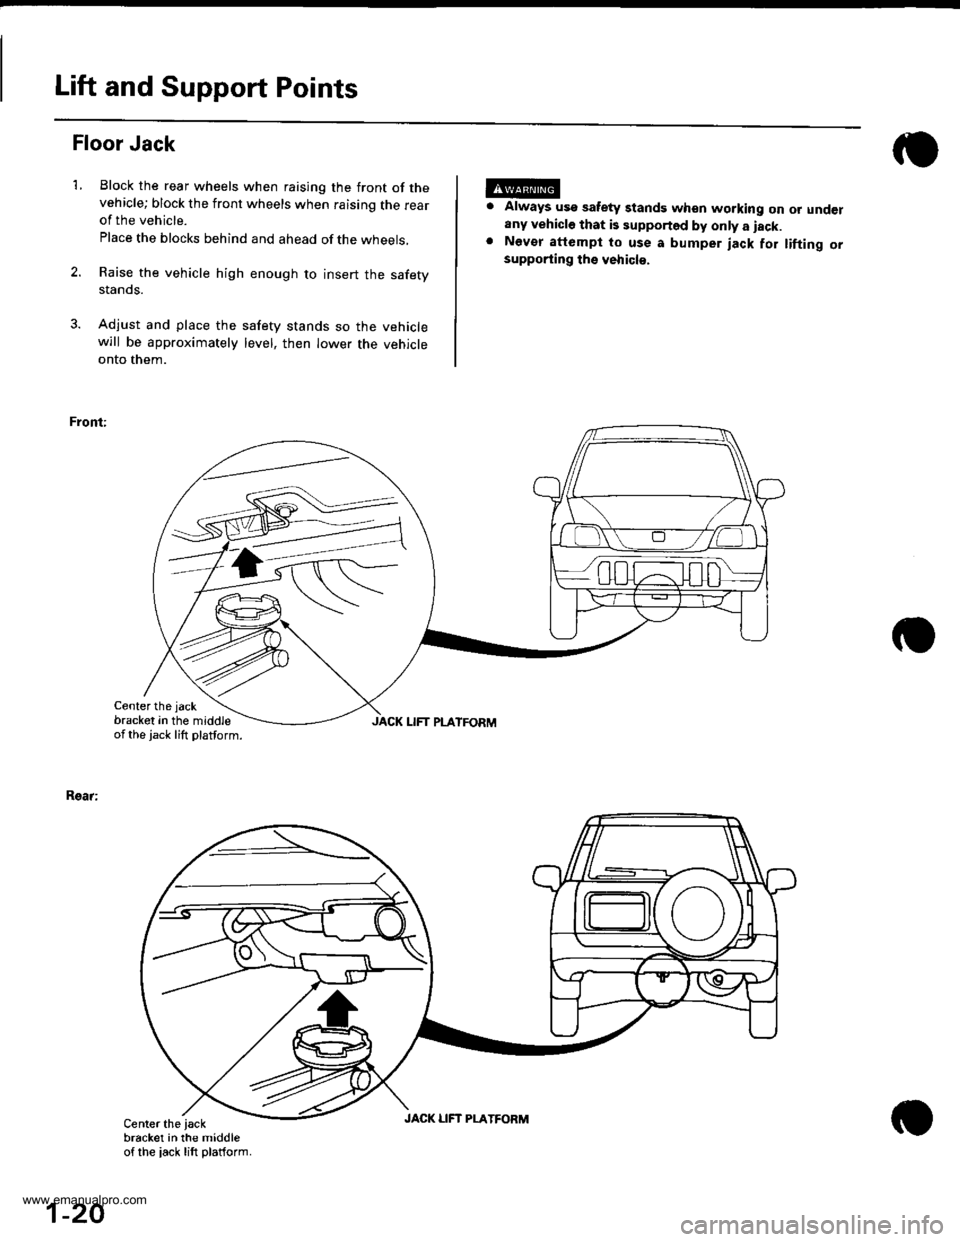 HONDA CR-V 1997 RD1-RD3 / 1.G Workshop Manual 
Lift and Support Points
1.
Floor Jack
Block the rear wheels when raising the front of thevehicle; block the front wheels when raising the rearof the vehicle.
Place the blocks behind and ahead of the 